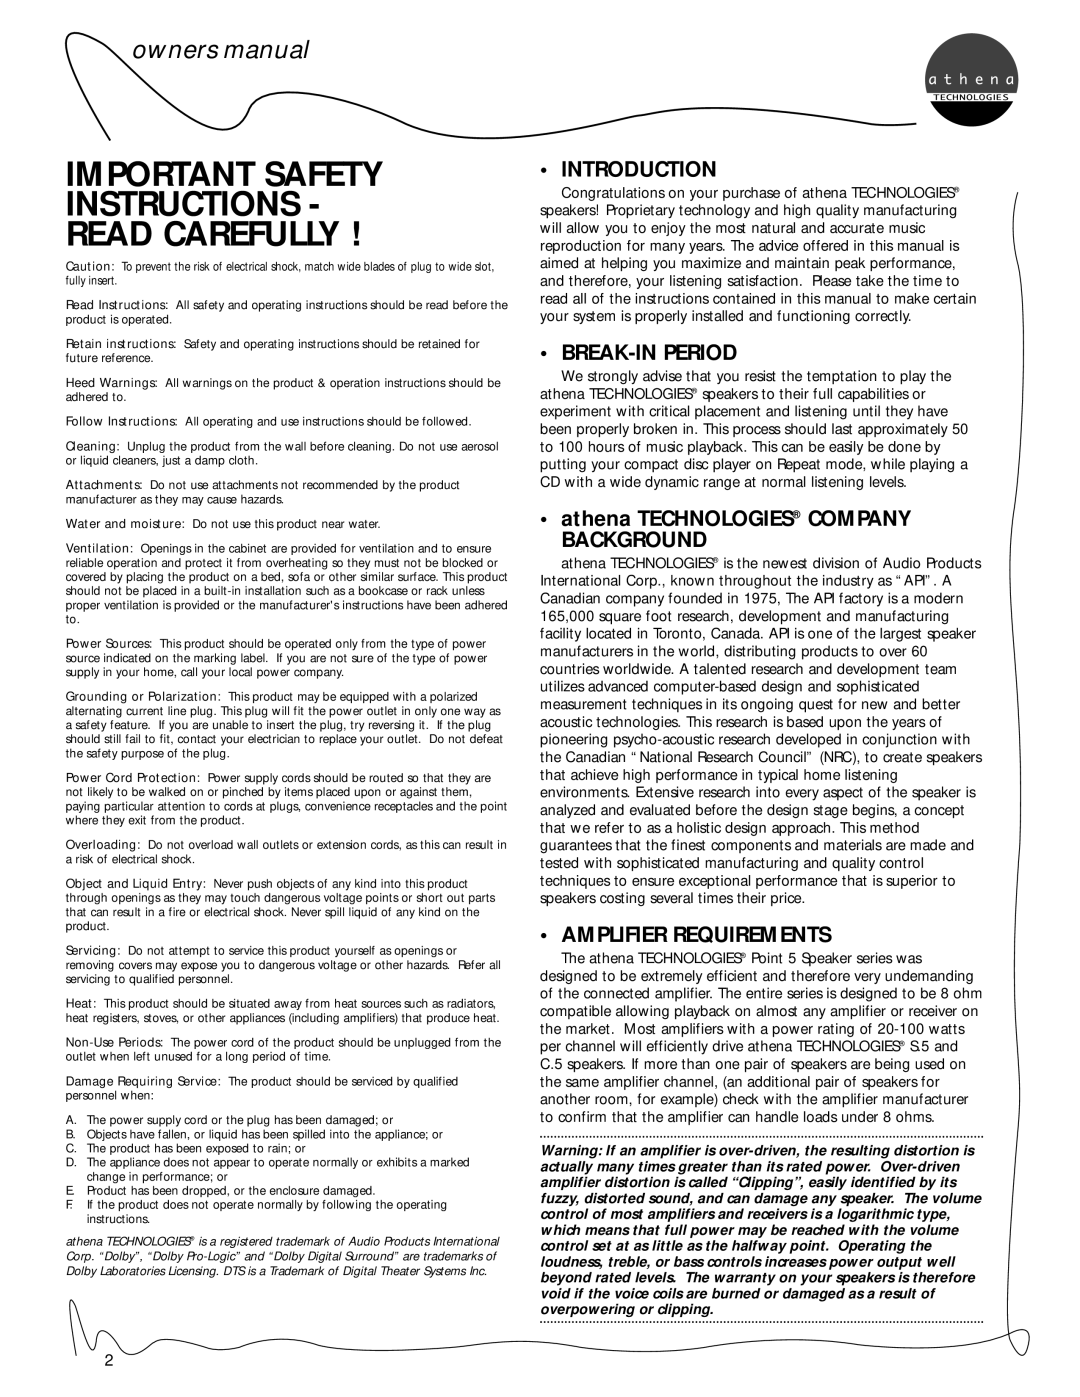 Athena Technologies P.5 Important Safety Instructions Read Carefully, Introduction, Break-Inperiod, Amplifier Requirements 